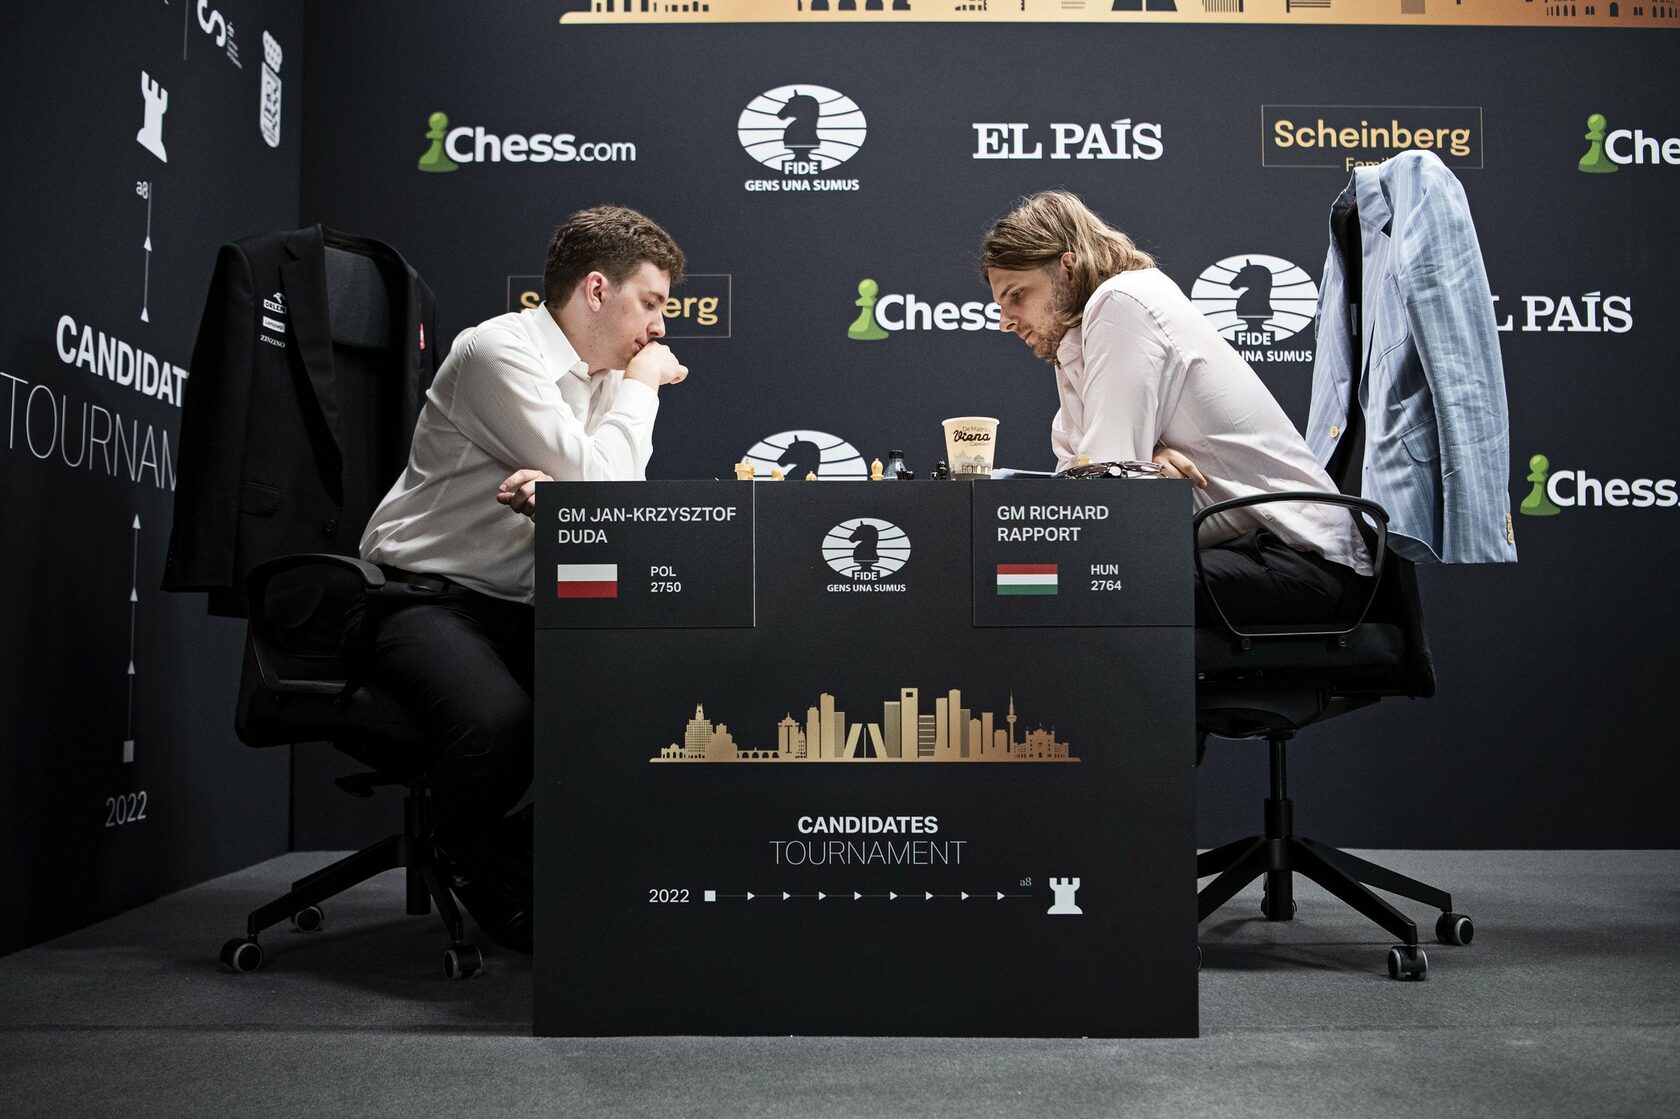 2022 Candidates Round 1: A confident start for Nepomniachtchi and Caruana